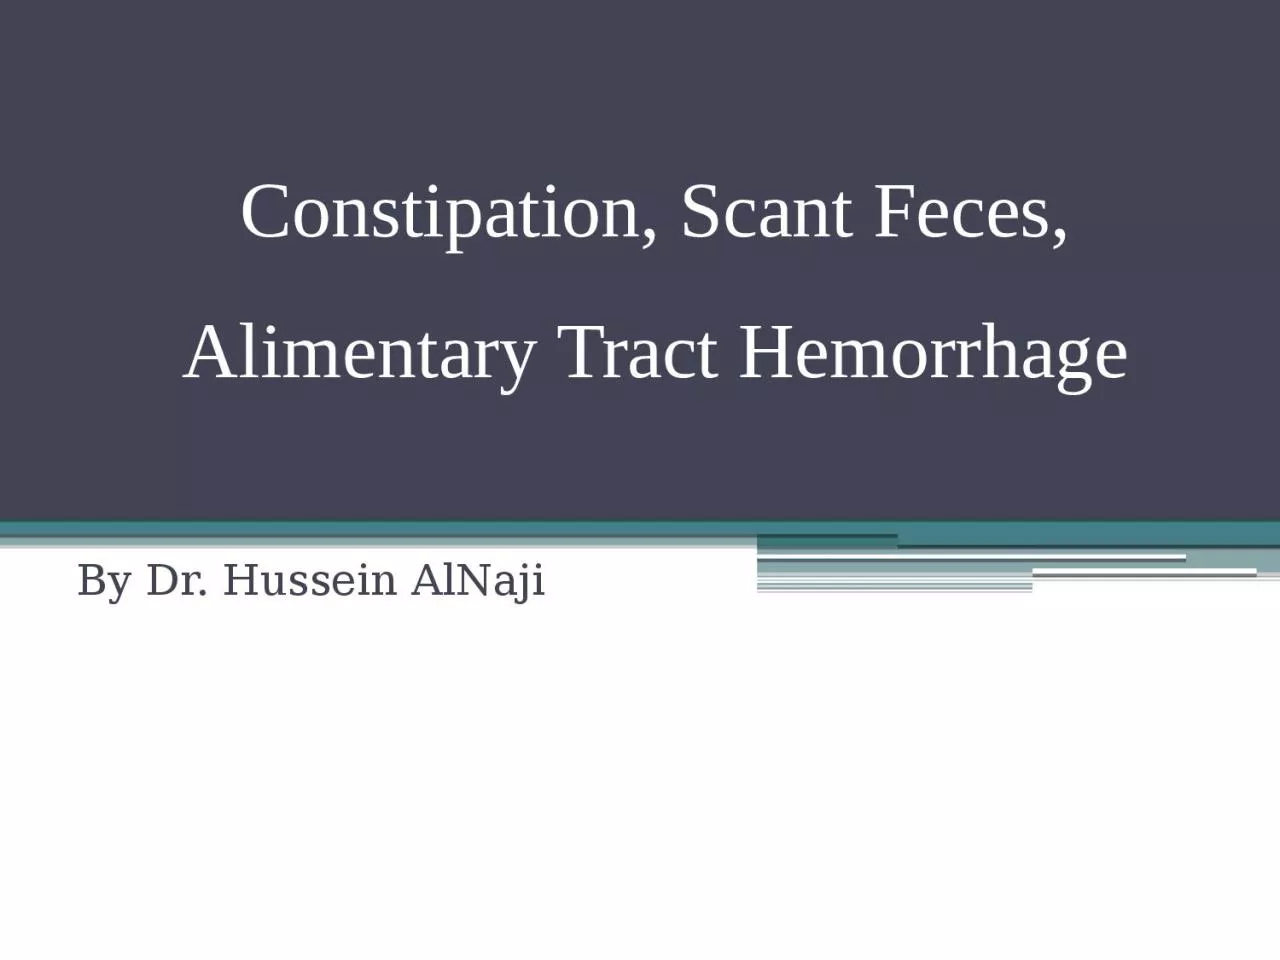 Constipation, Scant Feces, Alimentary Tract Hemorrhage